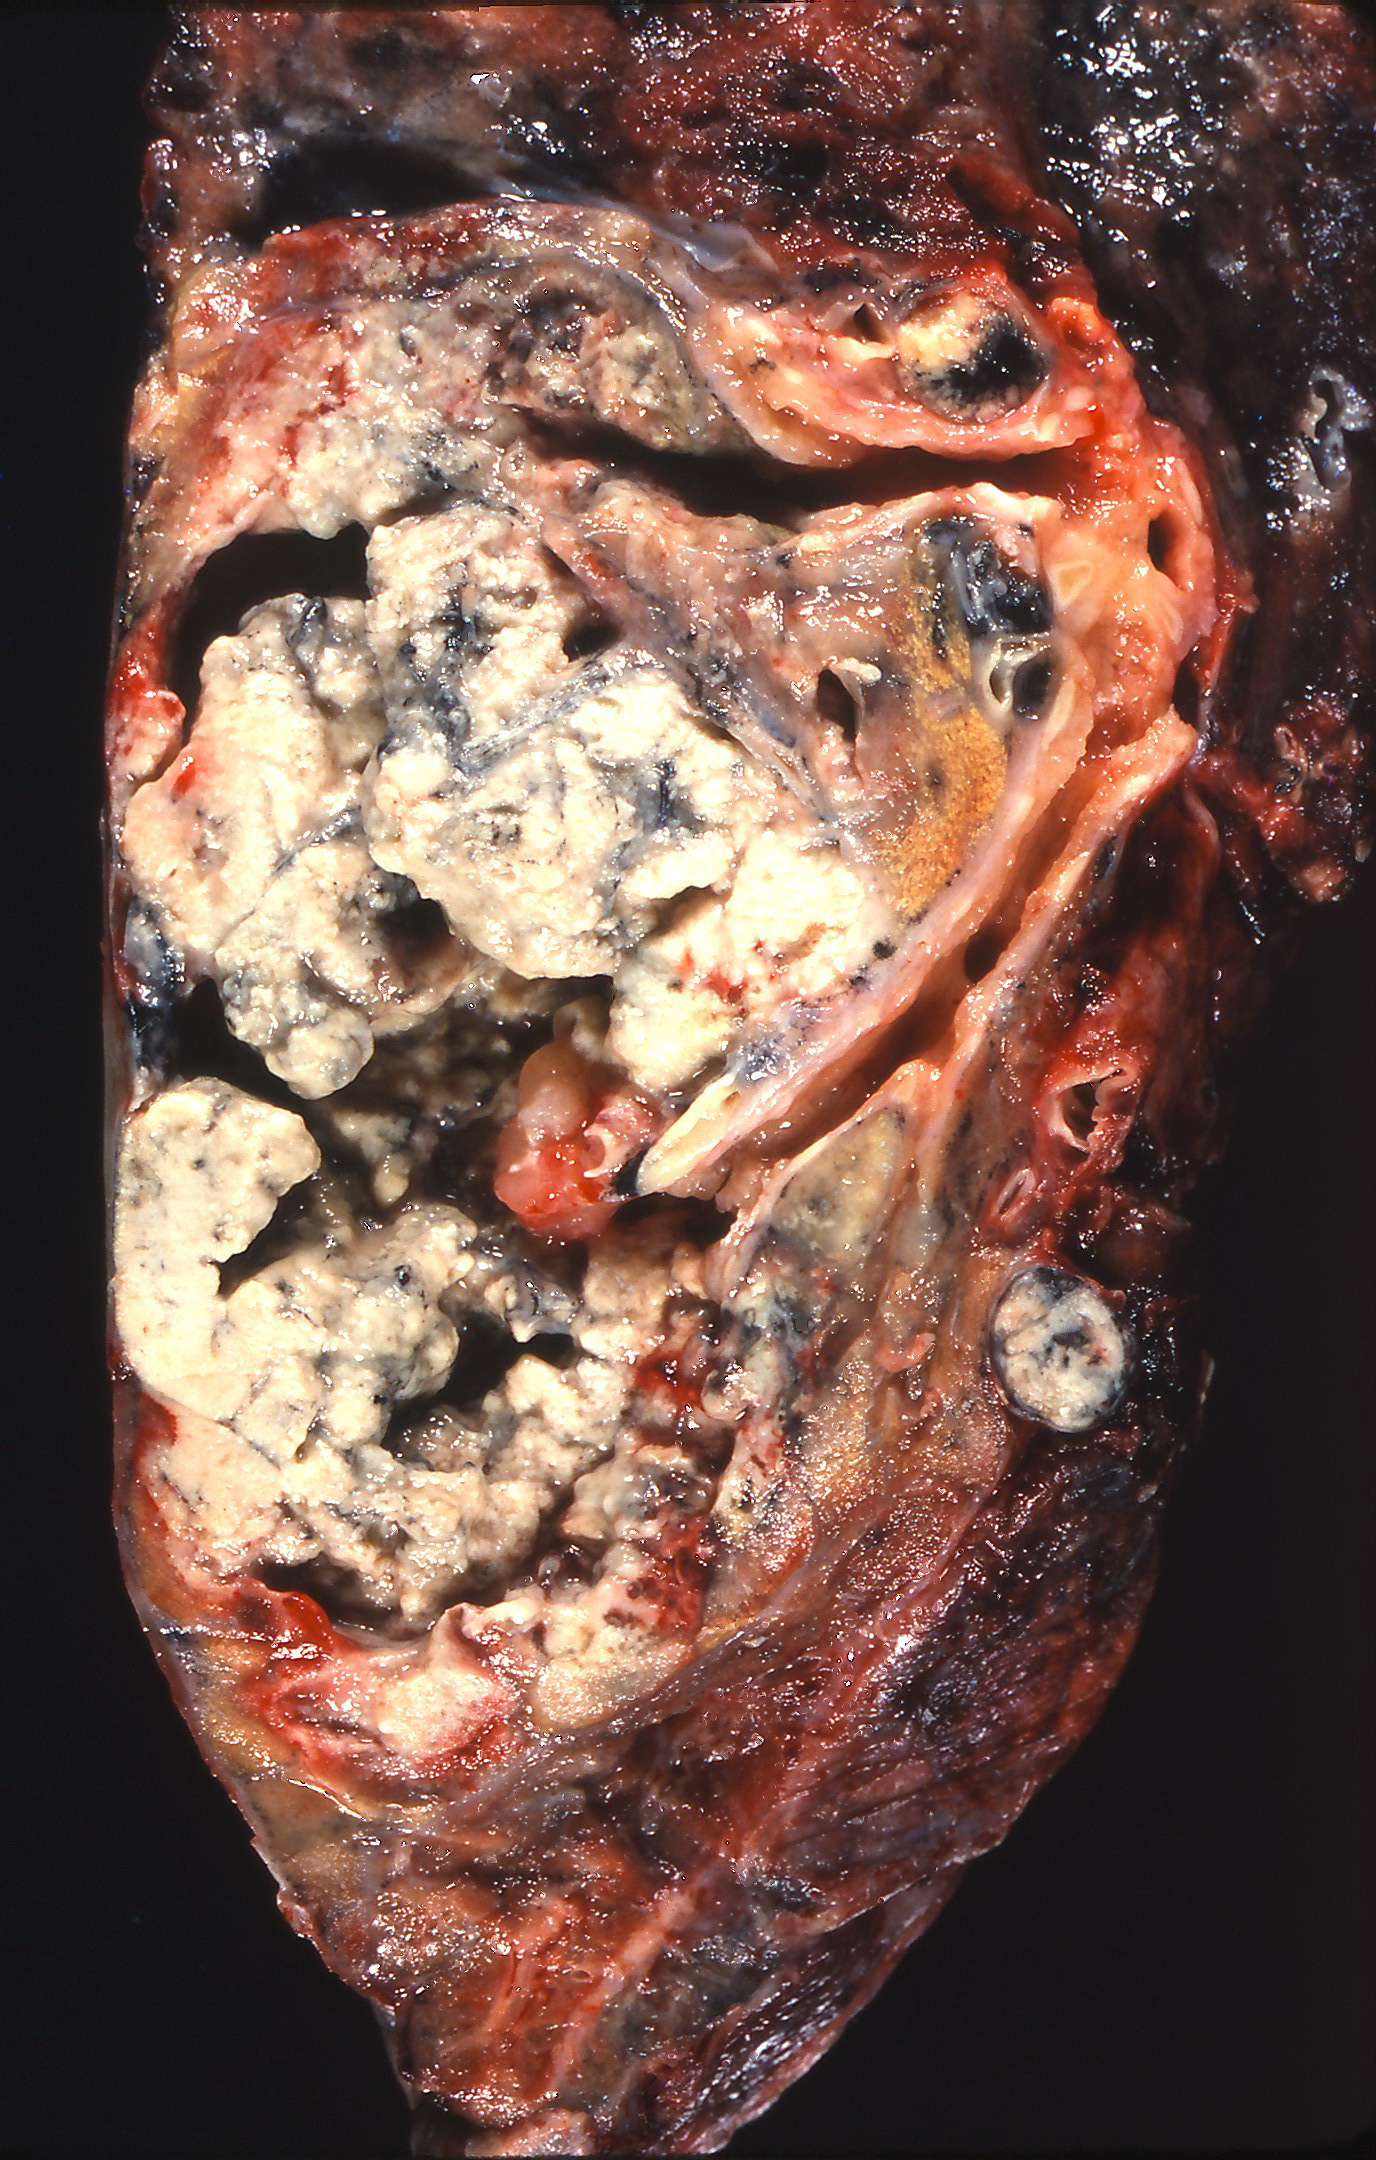 Gross pathology: cavitation, squamous lung cell cancer via, Wikimedia Commons By Yale Rosen from USA Uploaded by CFCF[6]